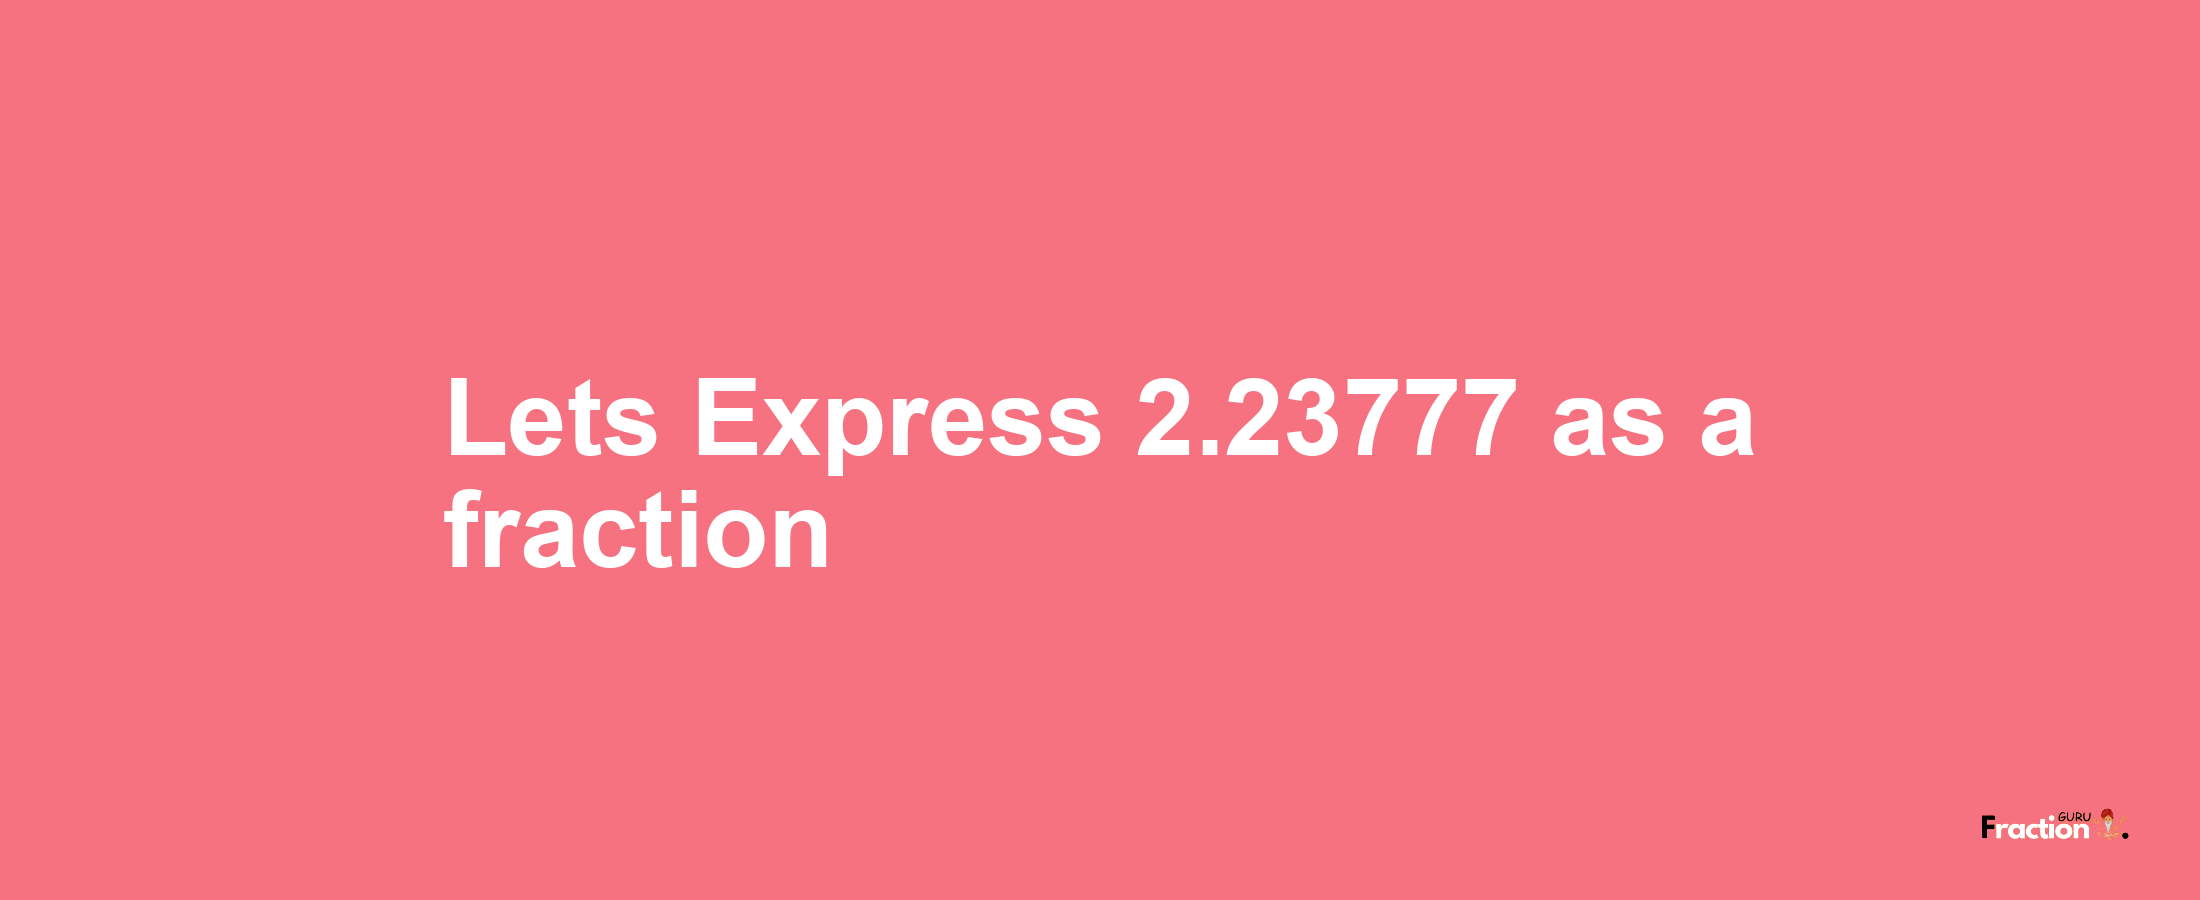 Lets Express 2.23777 as afraction